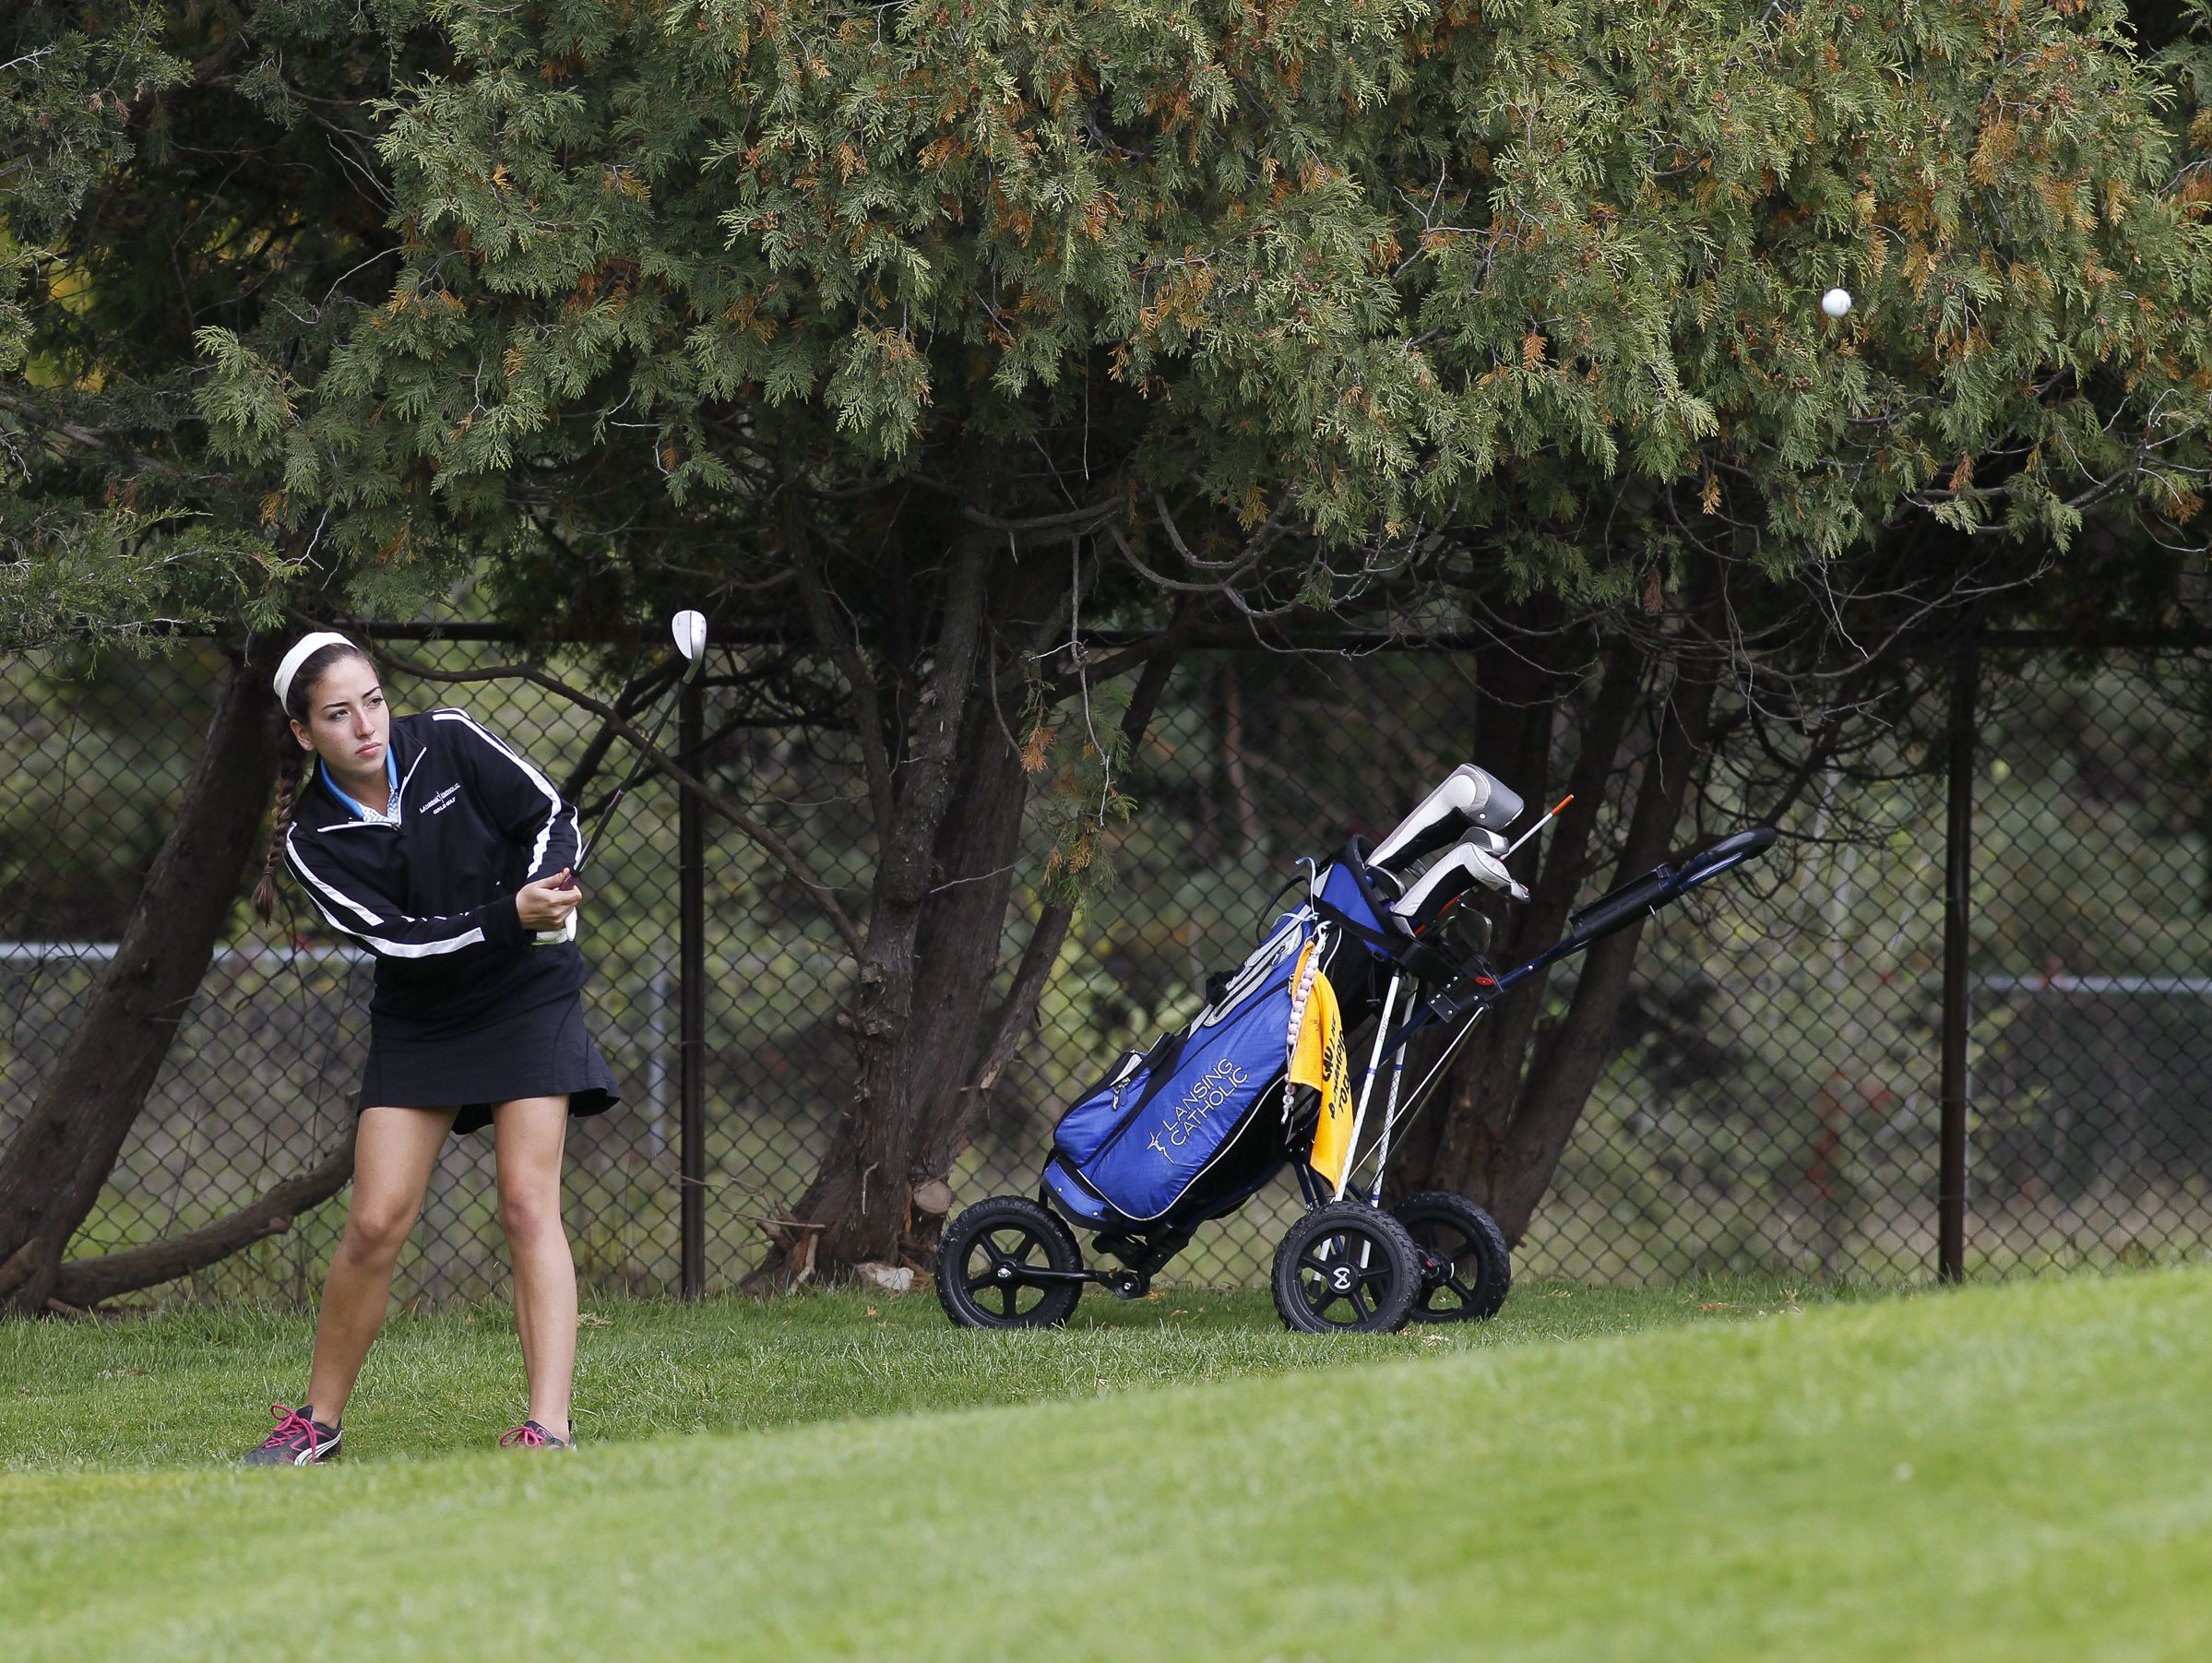 Lansing Catholic senior Alyssa Rodriguez chips her way onto the seventh green during the Div. 4 Girls Golf Finals October 15, 2016, at Forest Akers West at Michigan State University.